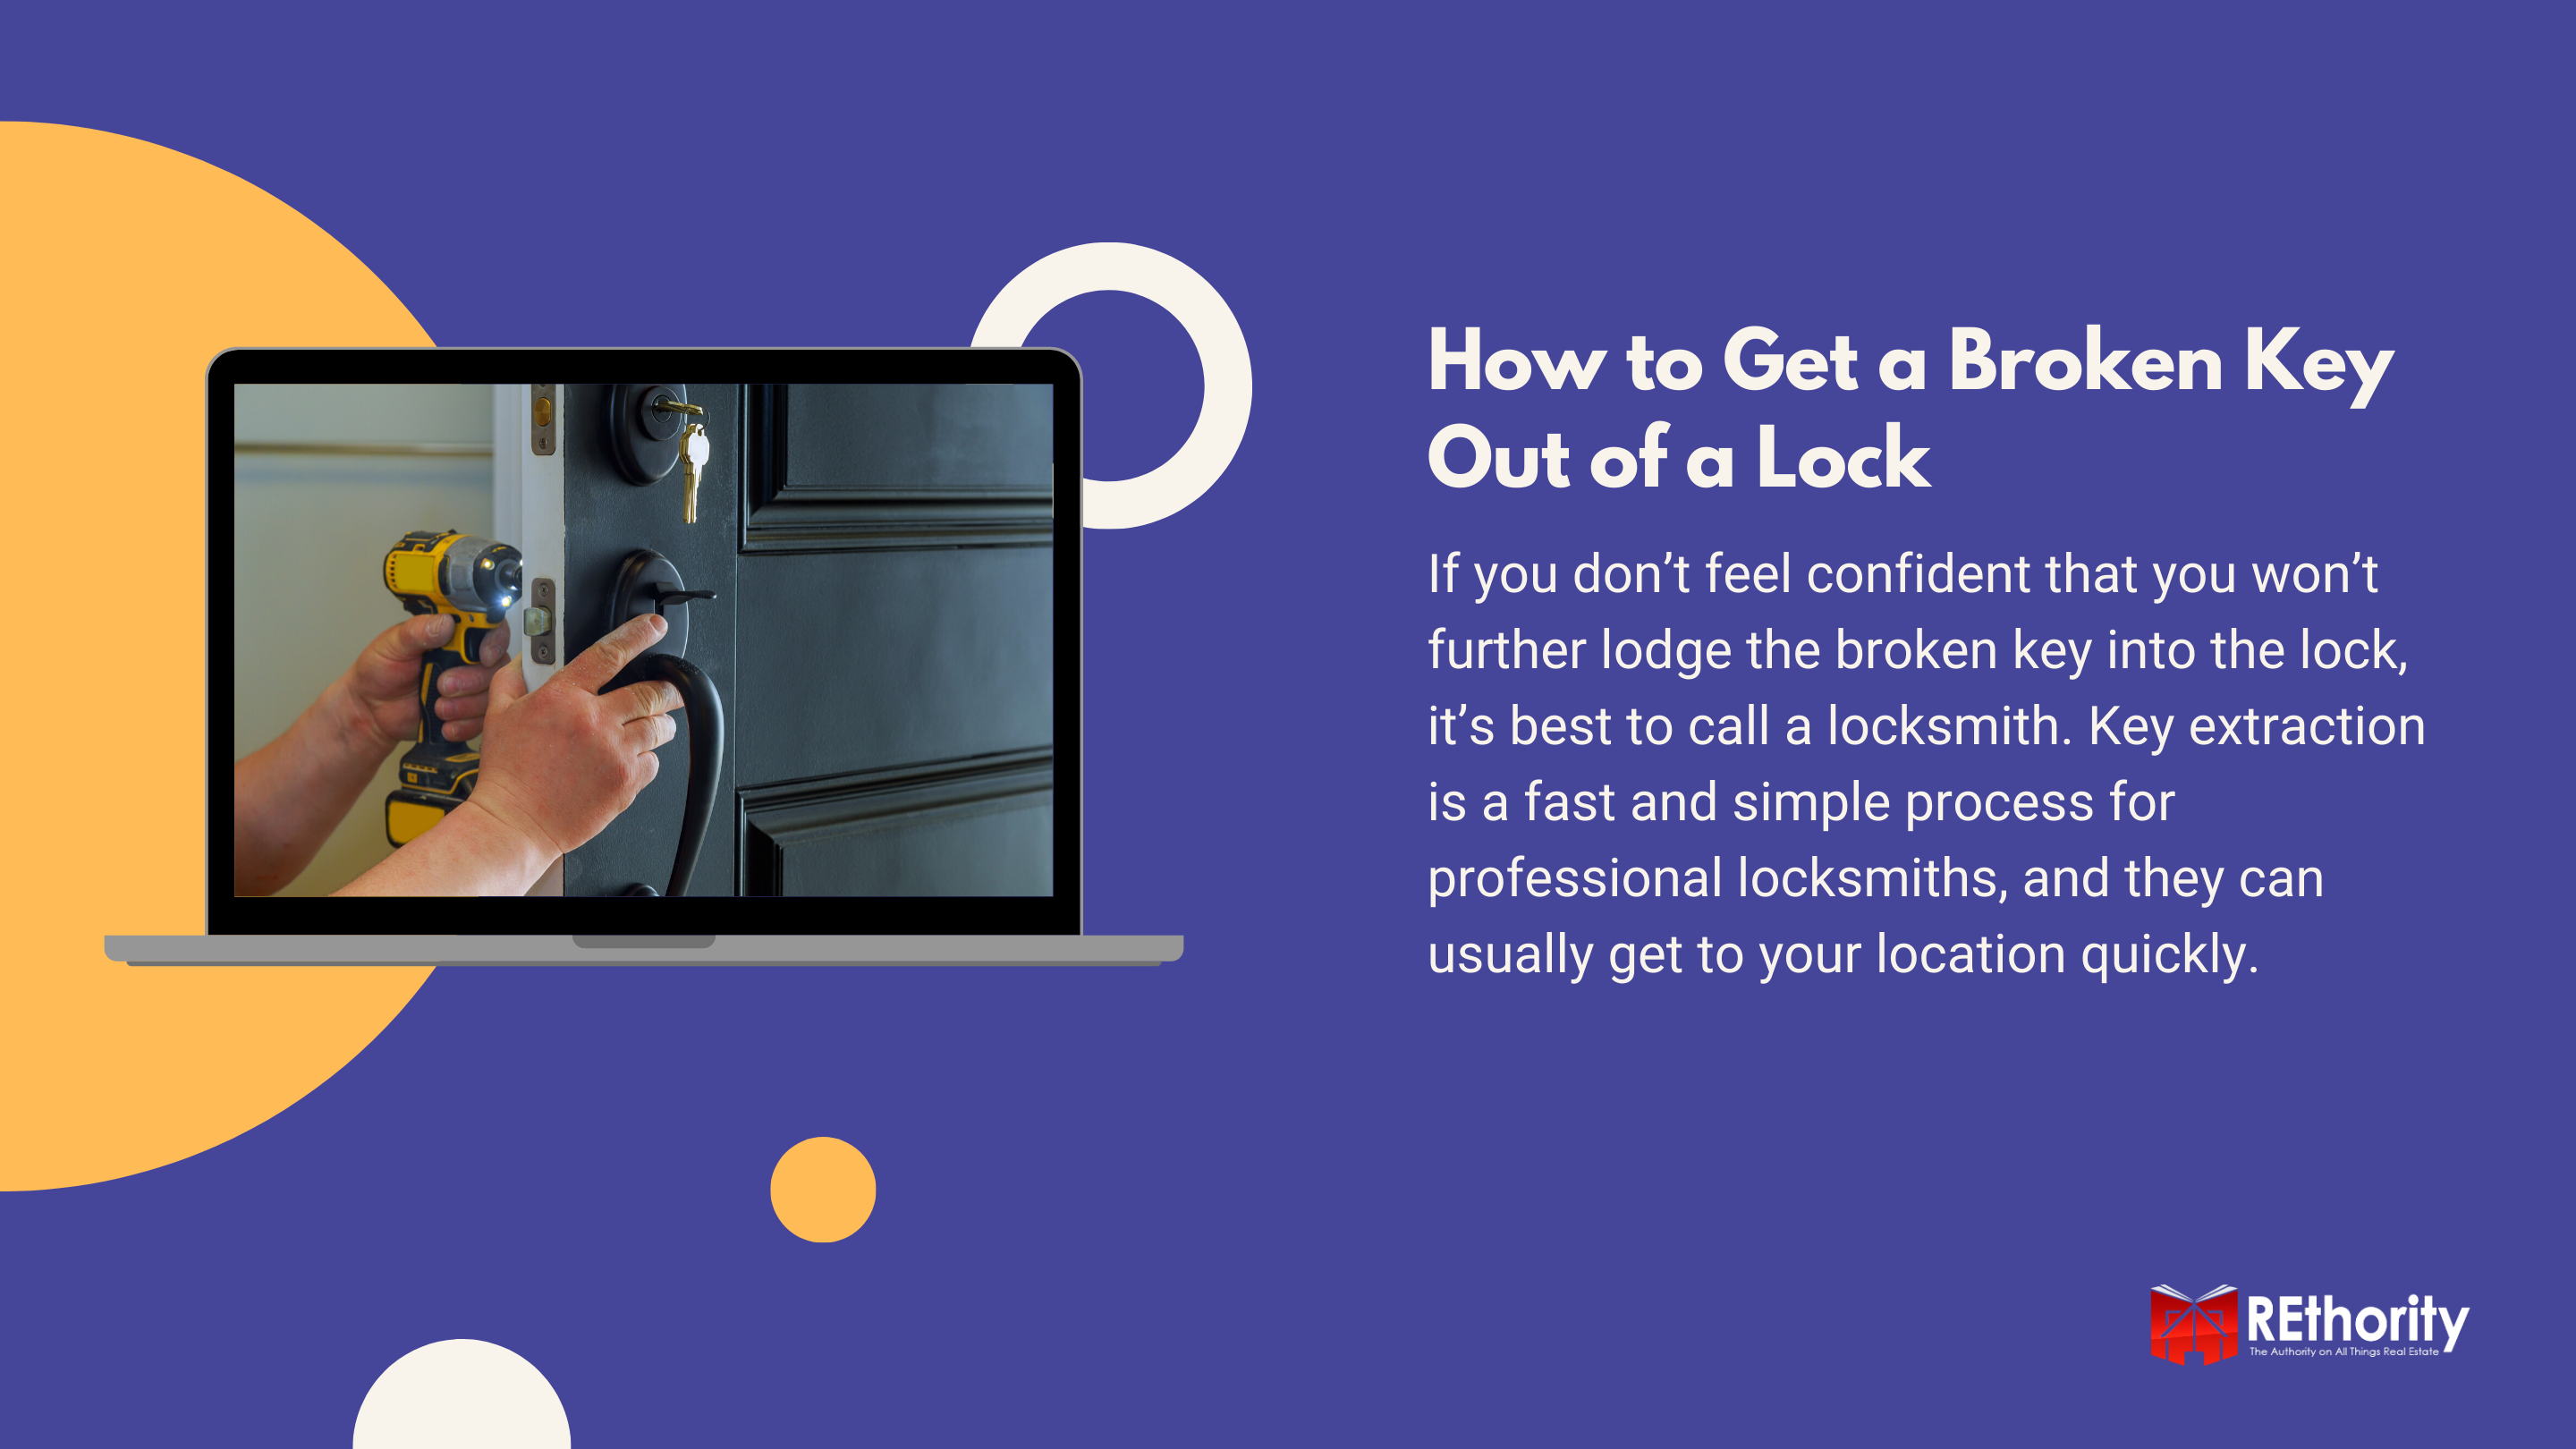 How to Get a Broken Key Out of a Lock graphic